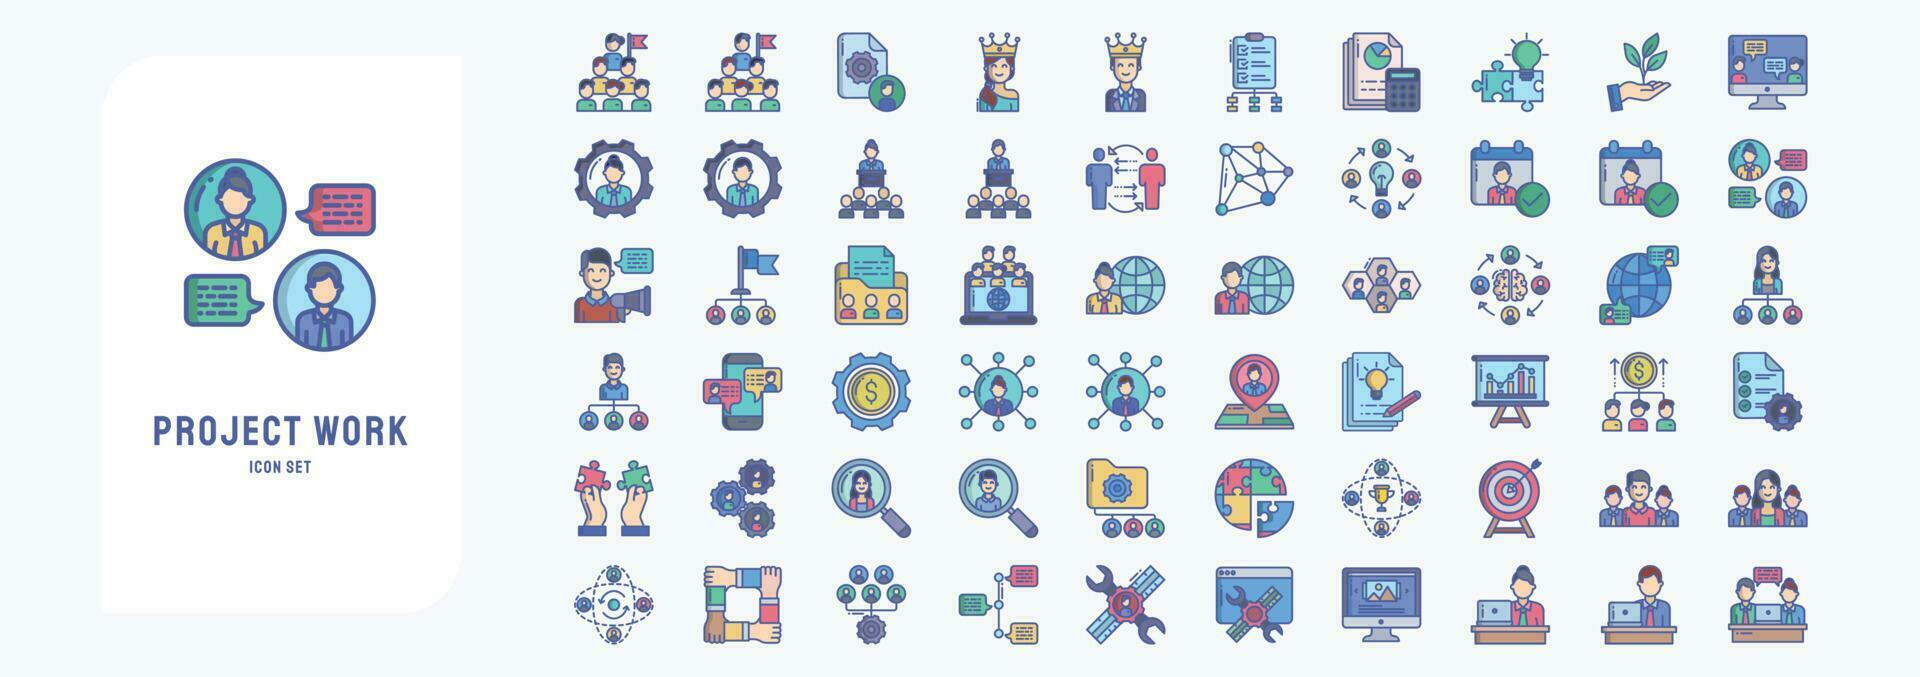 Collection of icons related to Project work, including icons like Achievement, Employee, Briefing, Business and finance and more vector